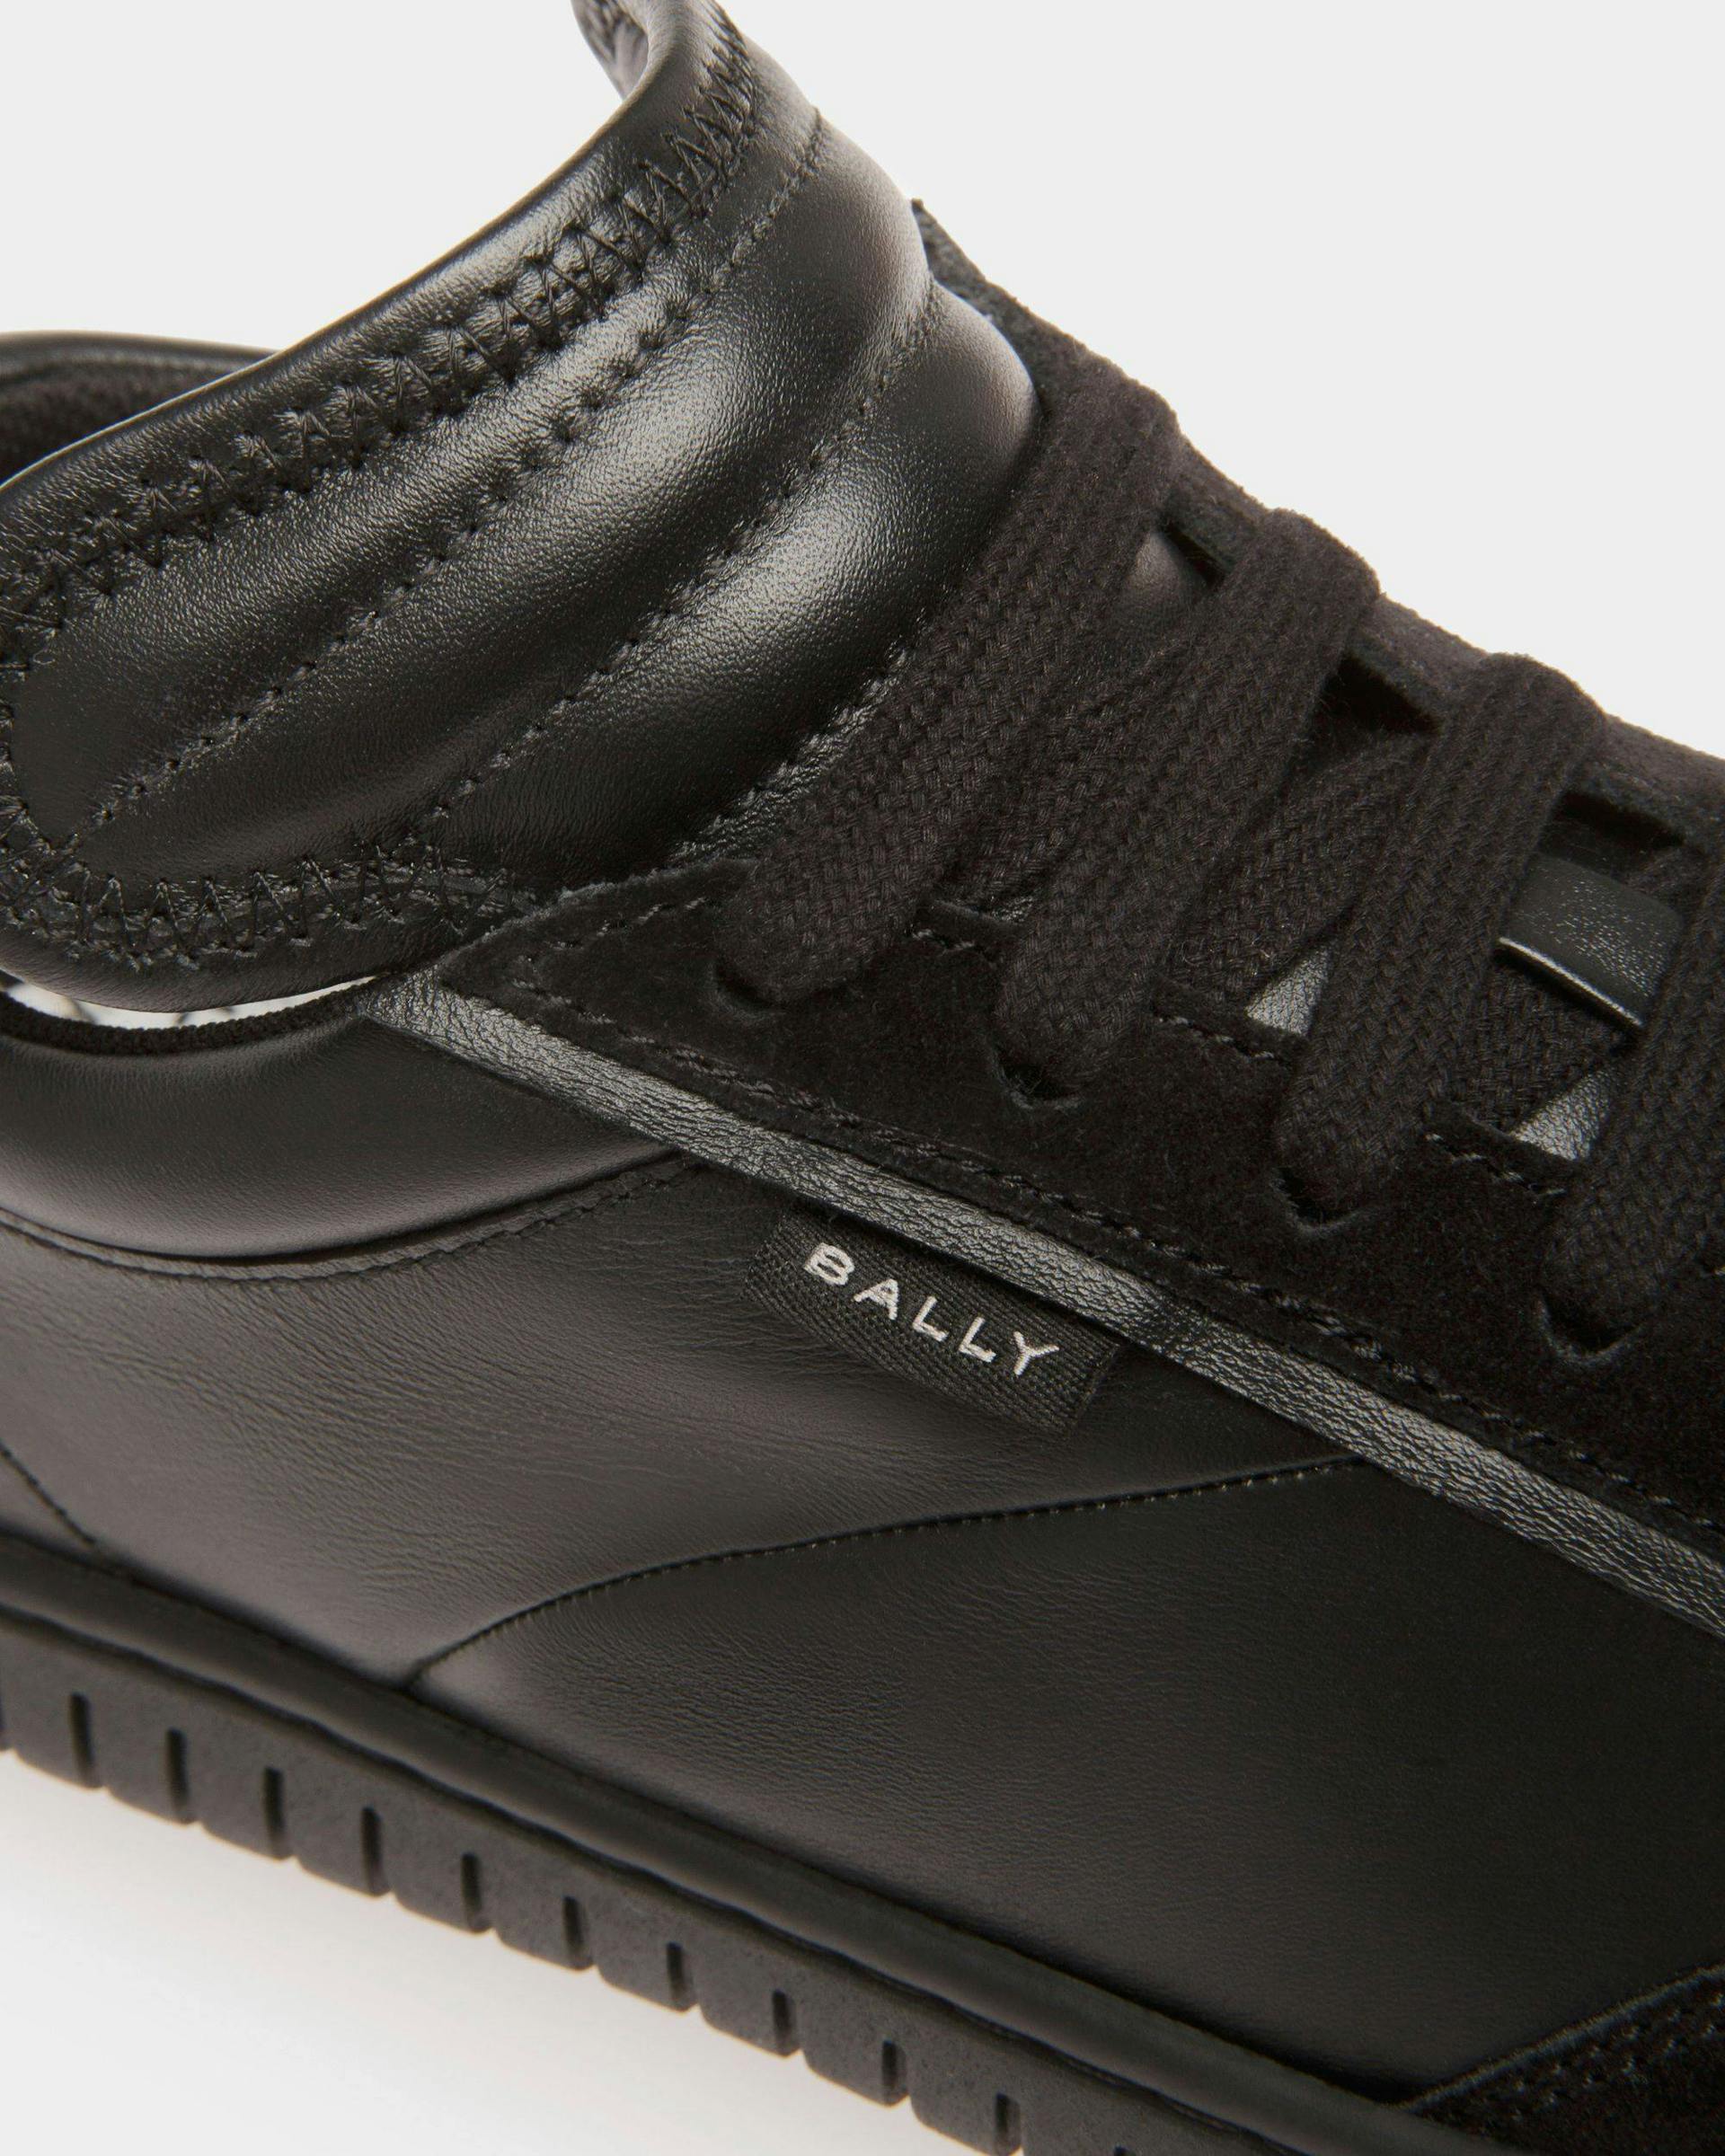 Player Sneakers In Black Leather - Women's - Bally - 05